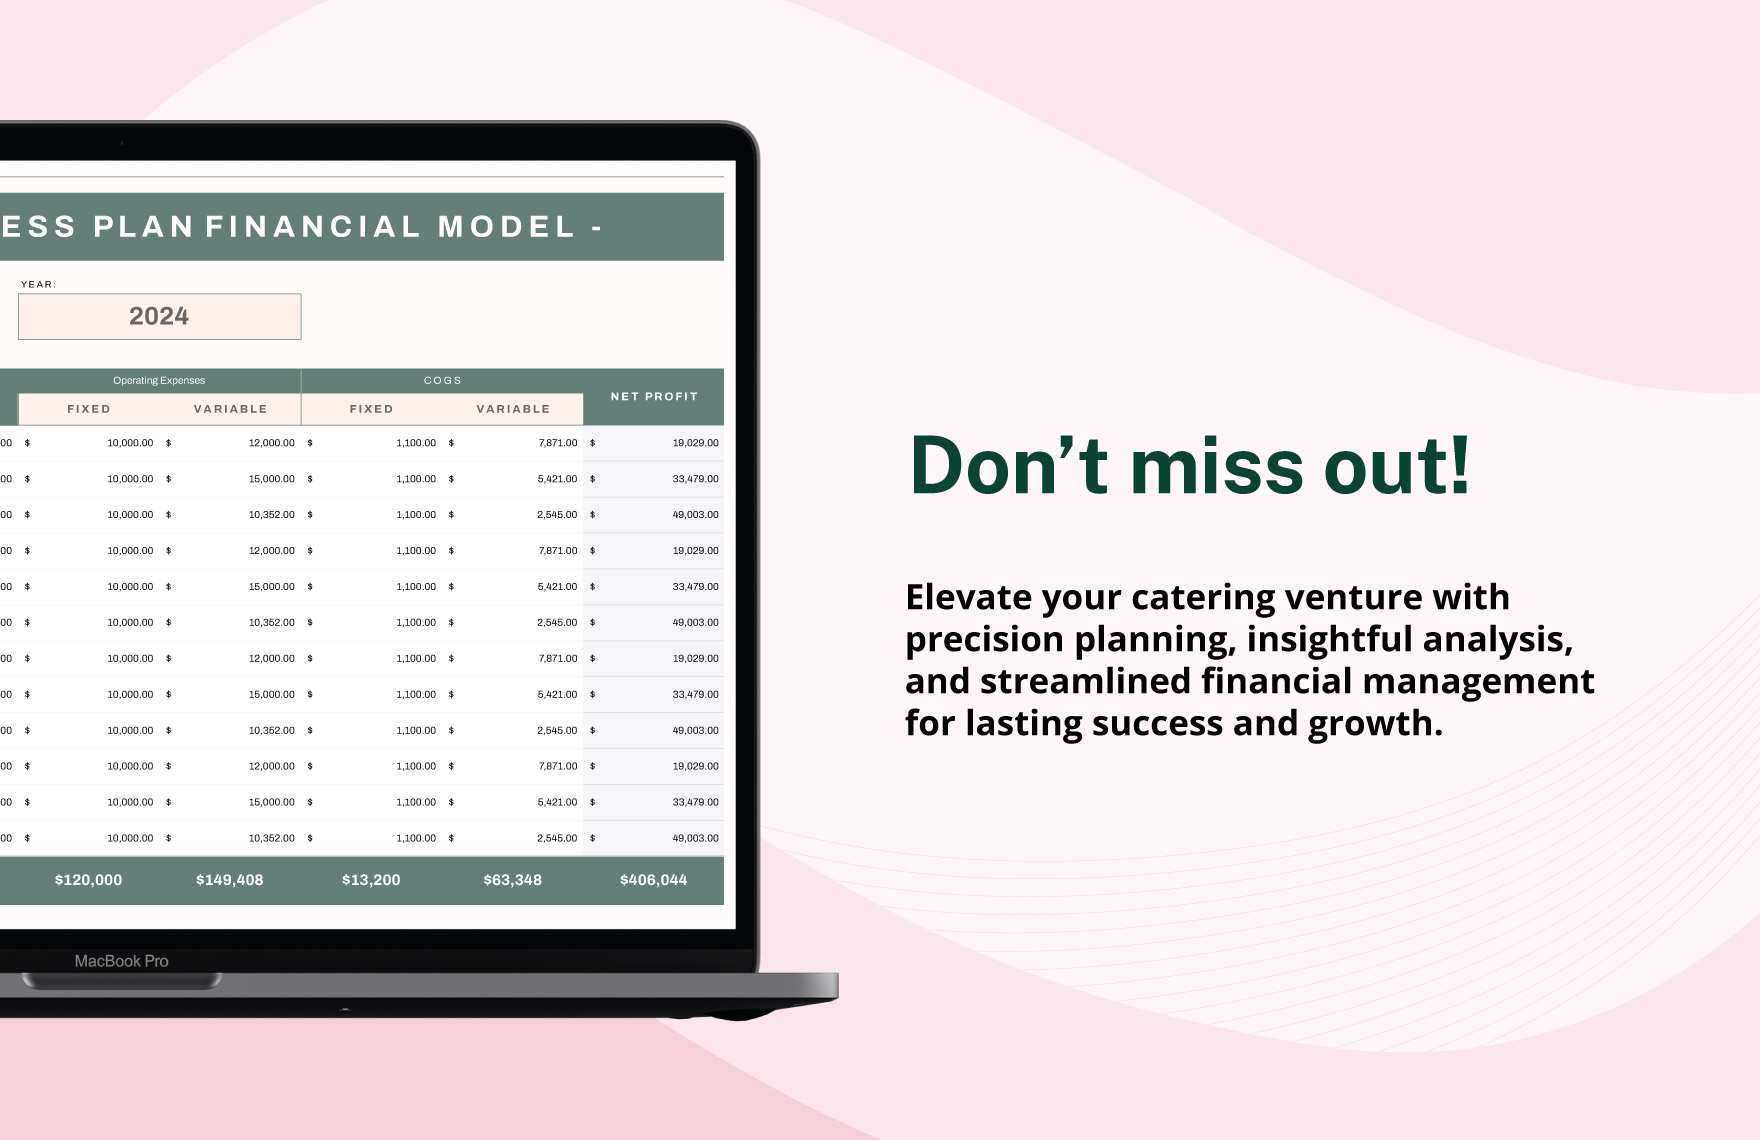 Catering Business Plan Financial Model Template